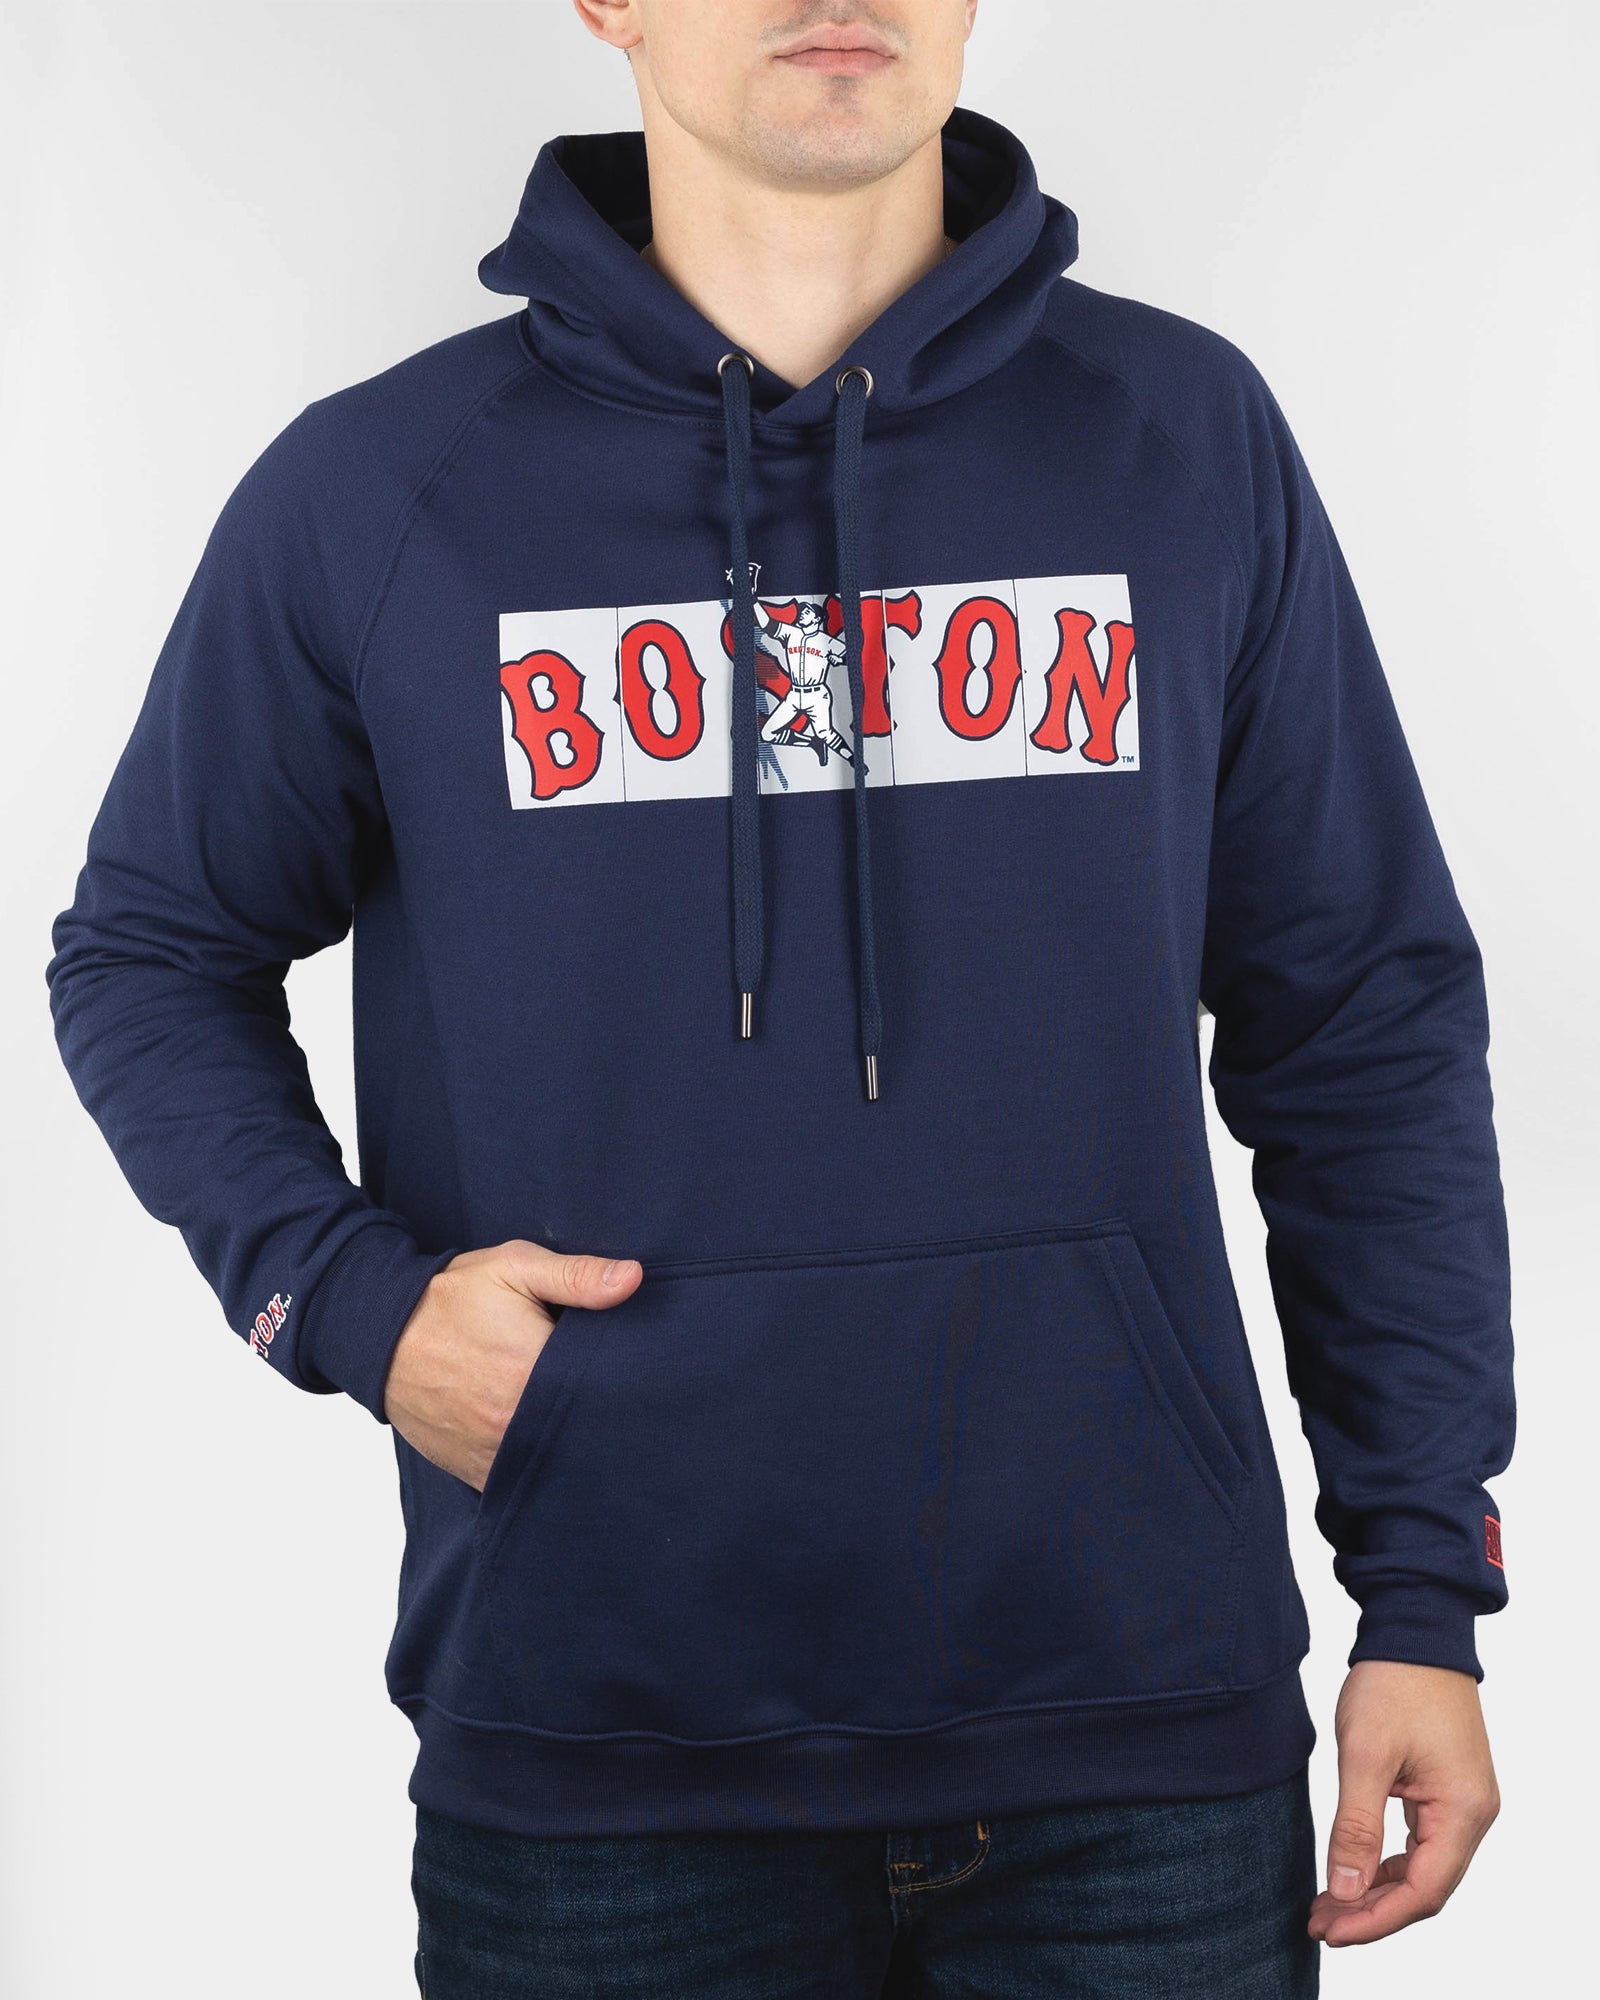 Boston Red Sox Embroidered Spell out Hooded Full Zip Sweatshirt Mens Sz XL  MLB